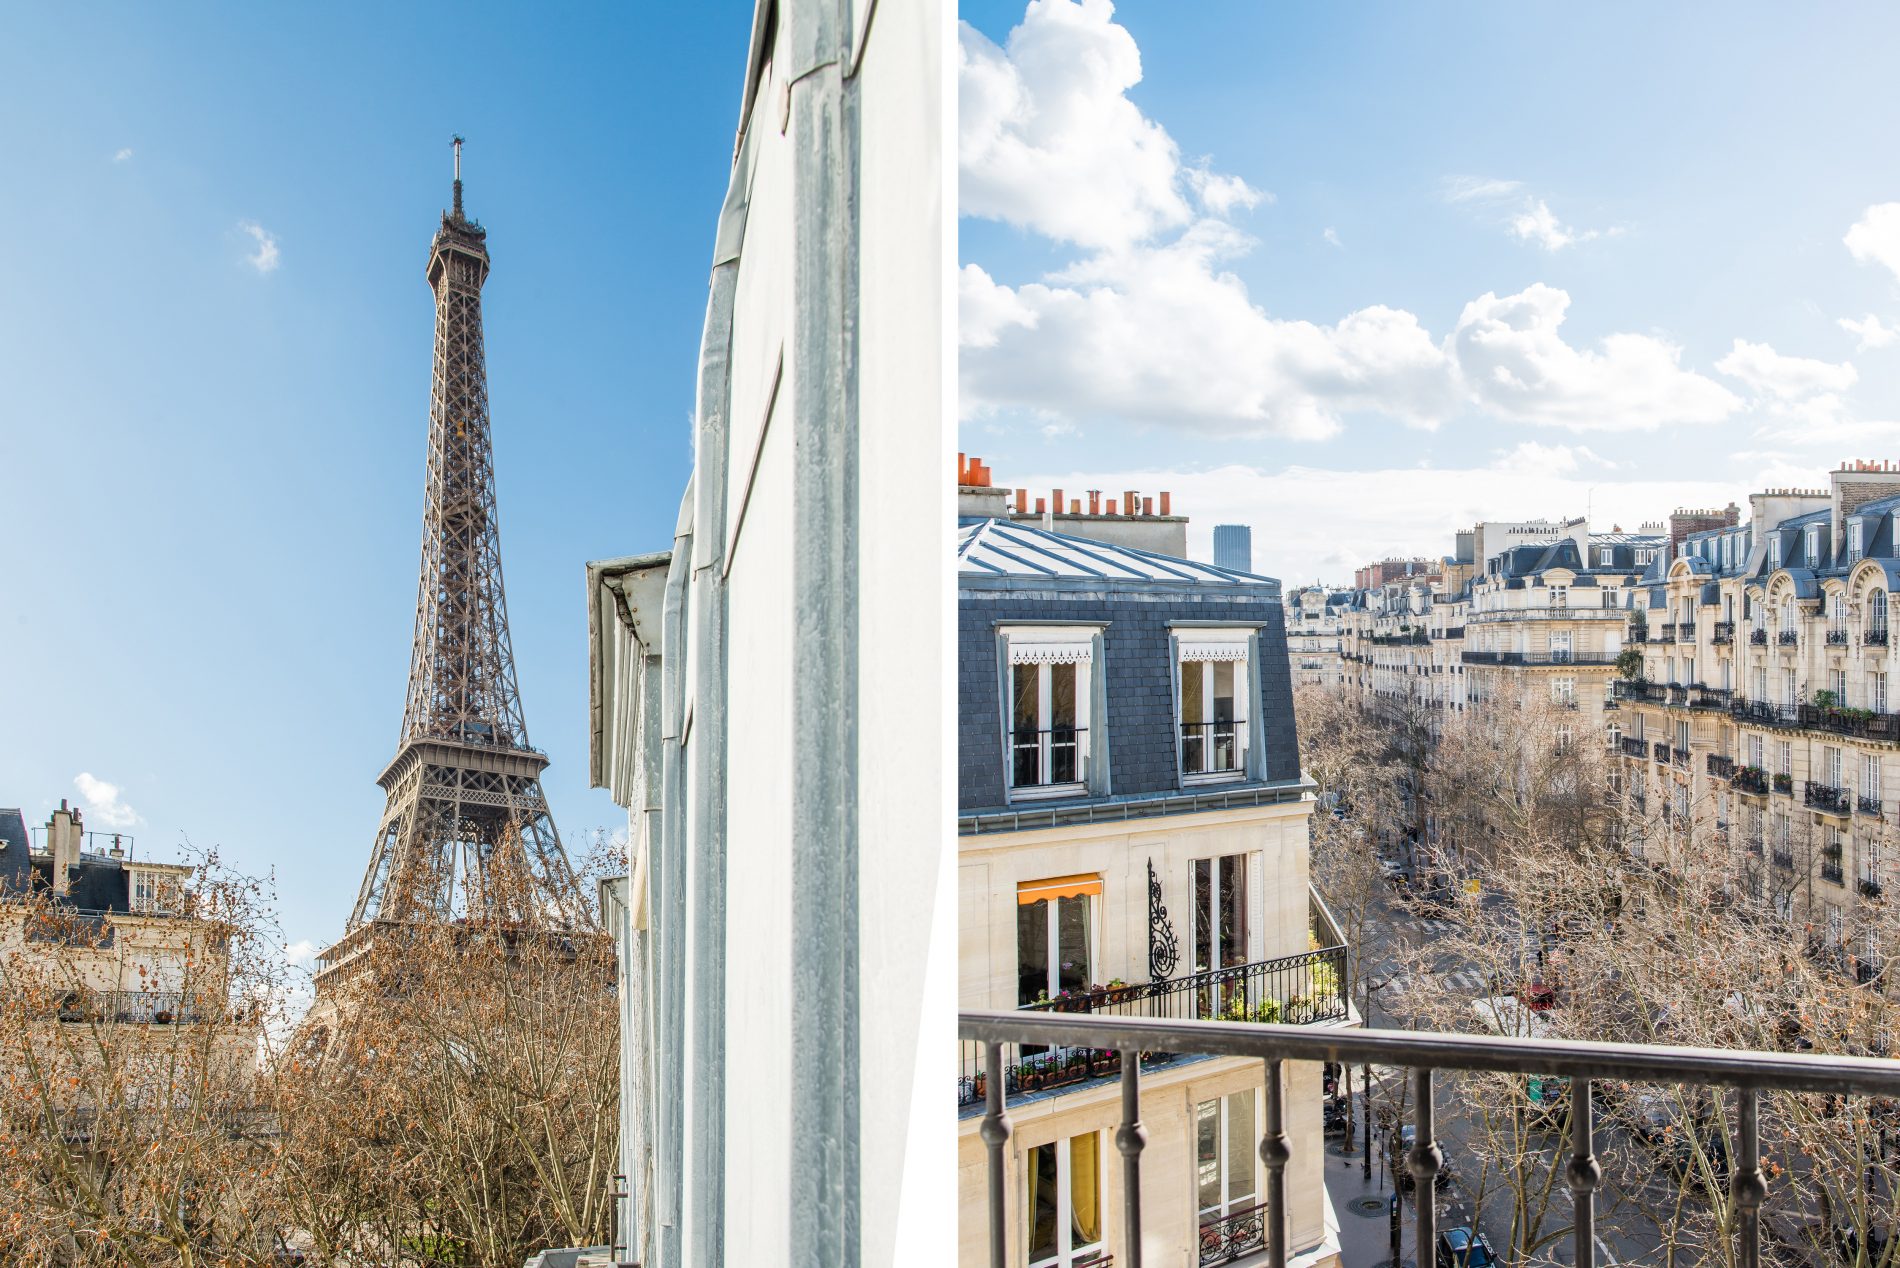 The real estate rivalry between London and Paris